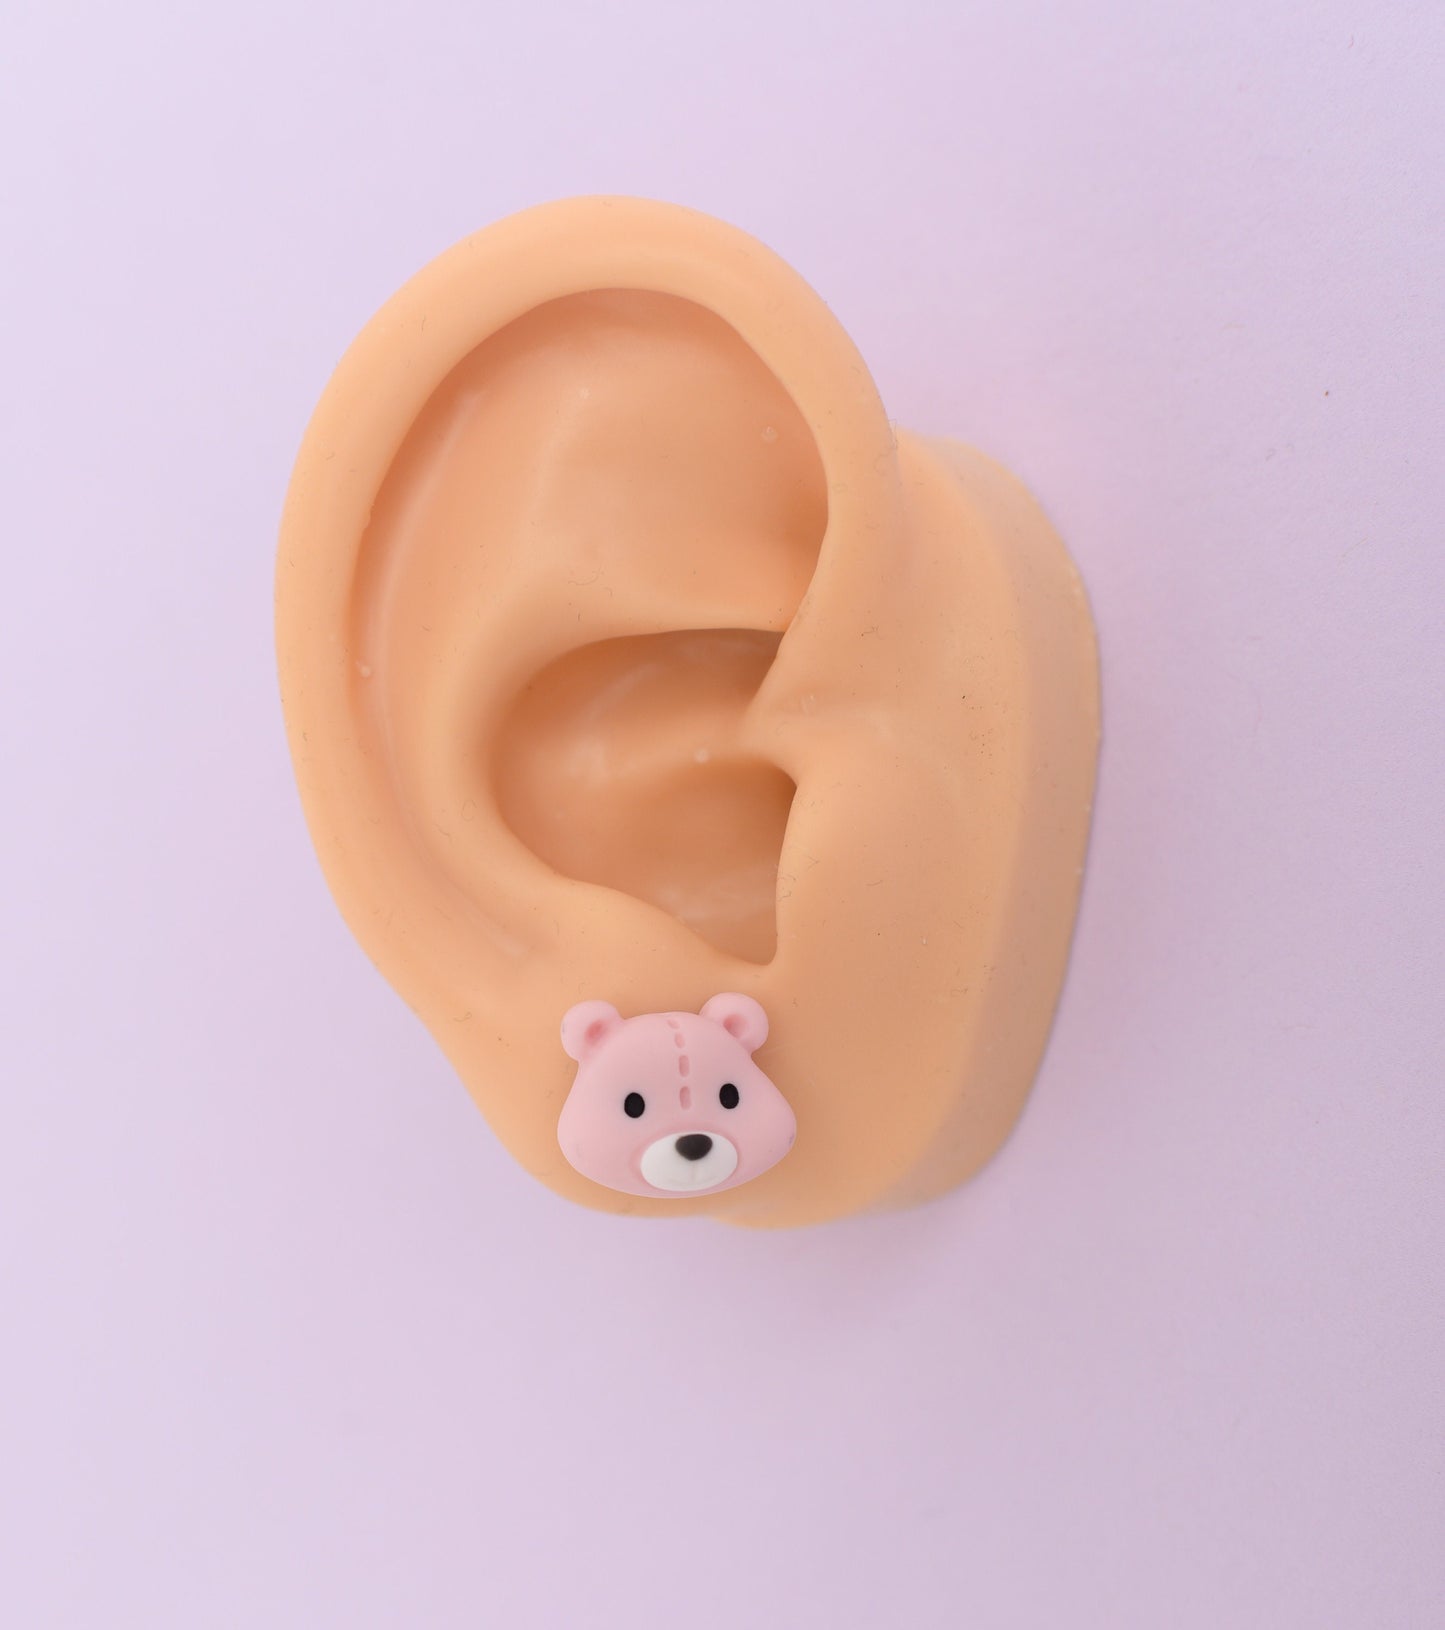 Pink Teddy Bear Earrings with Titanium Posts